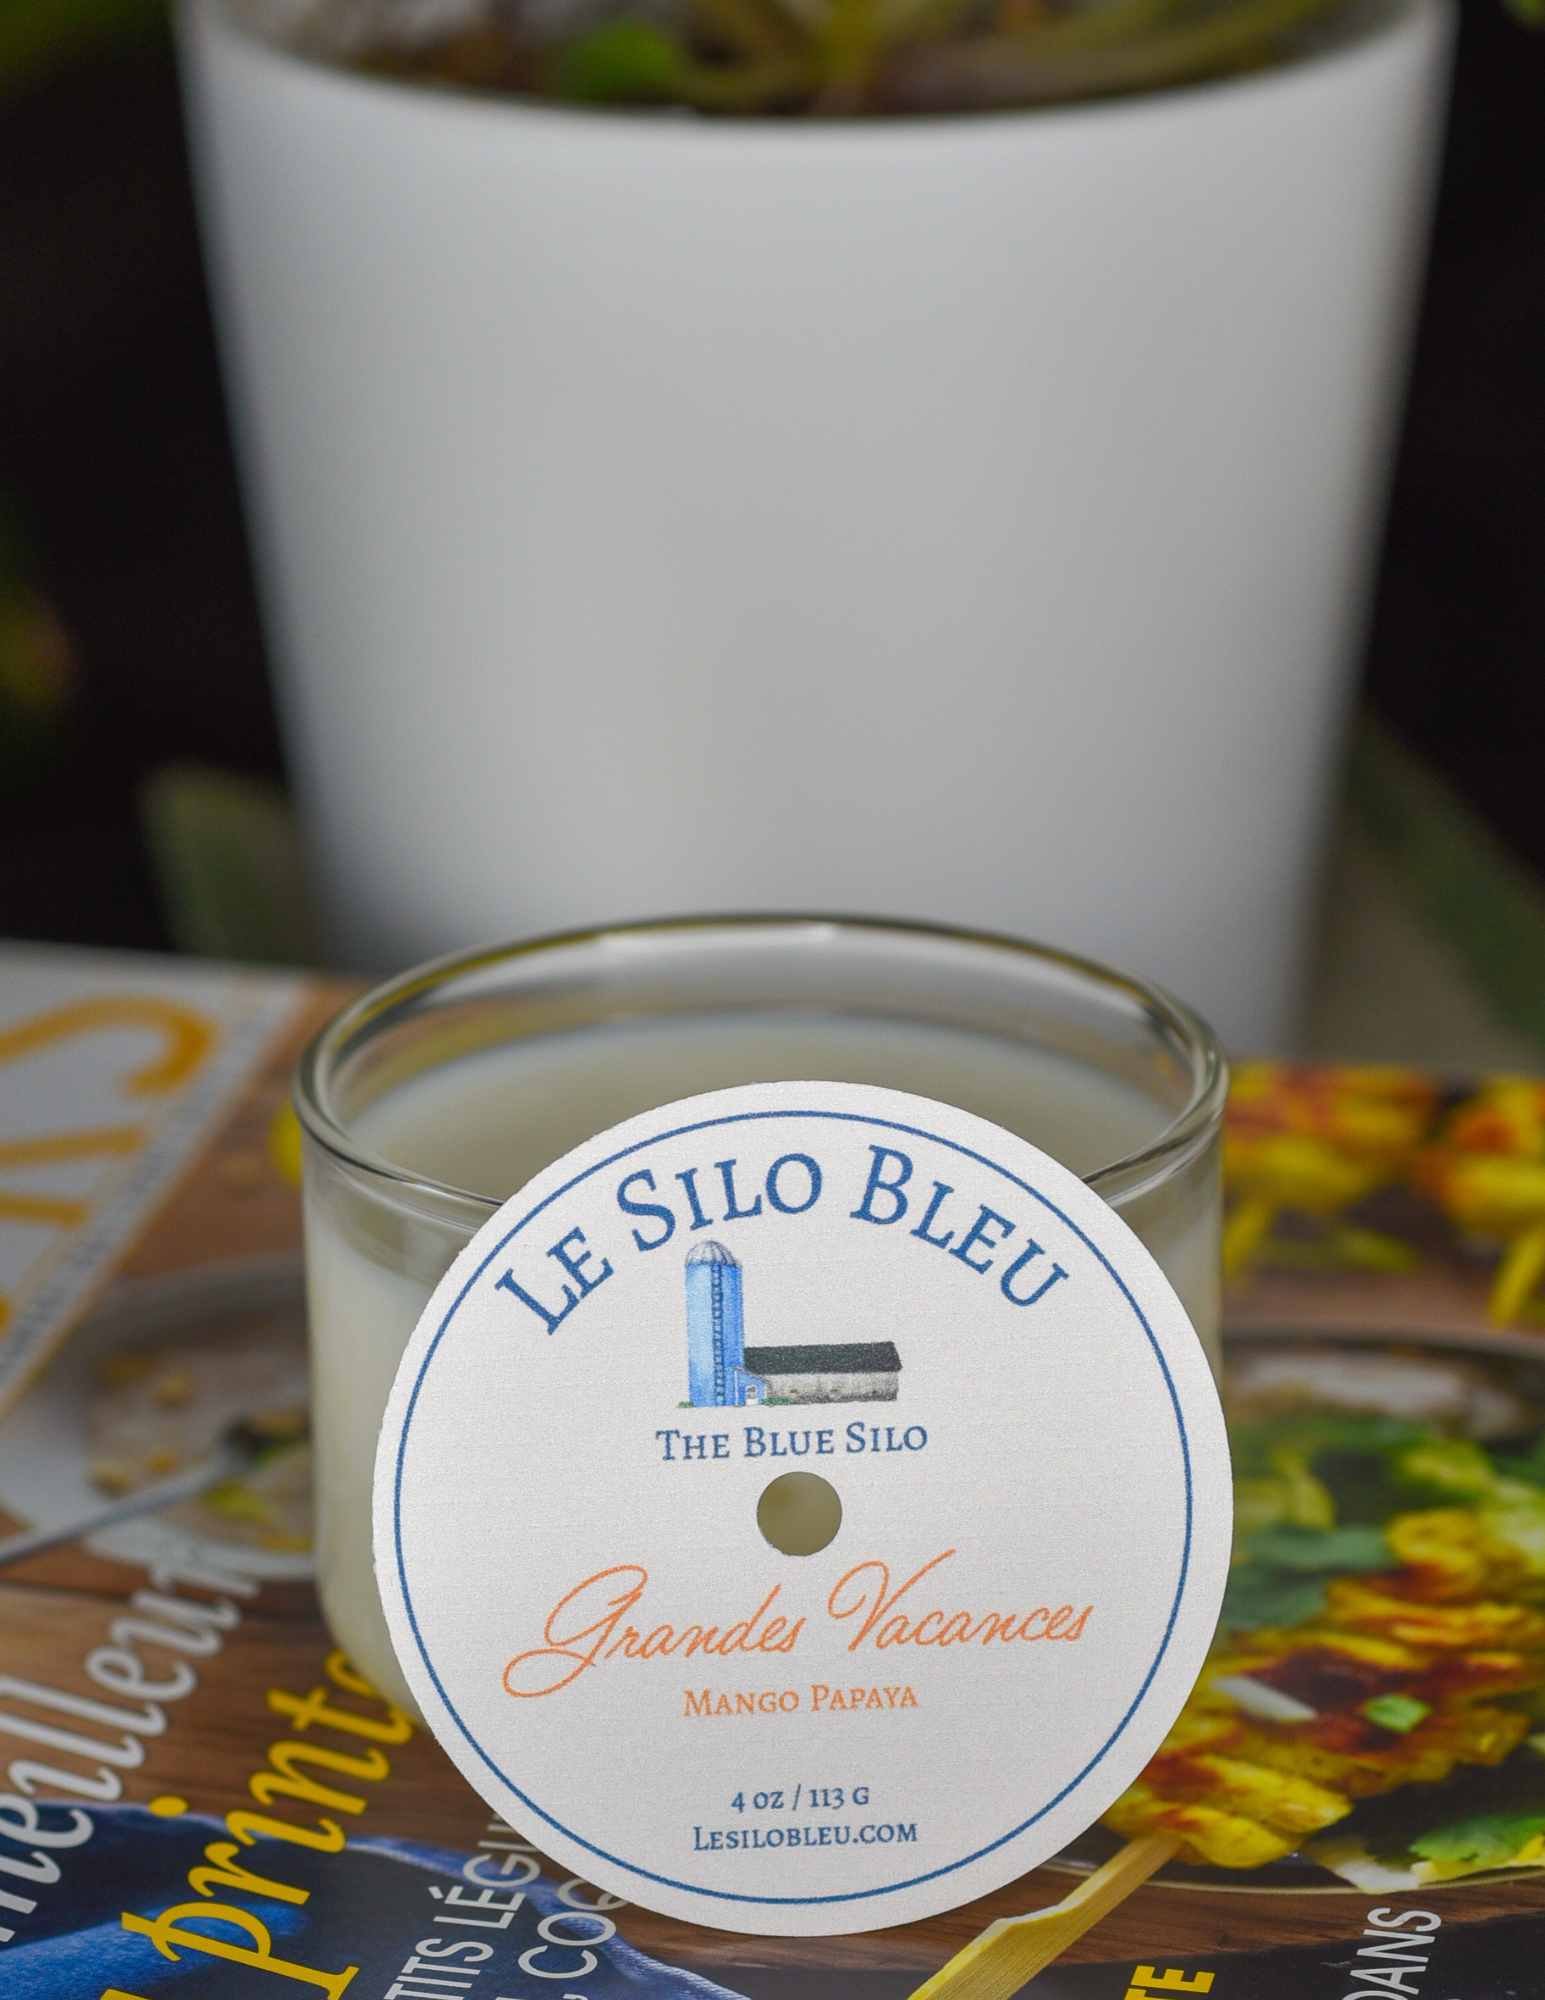 Grandes Vacanes, a mango papaya  scented candle with gold lid to the side. Candle is sitting on top of a French magazine with a plant in a white pot in the background.